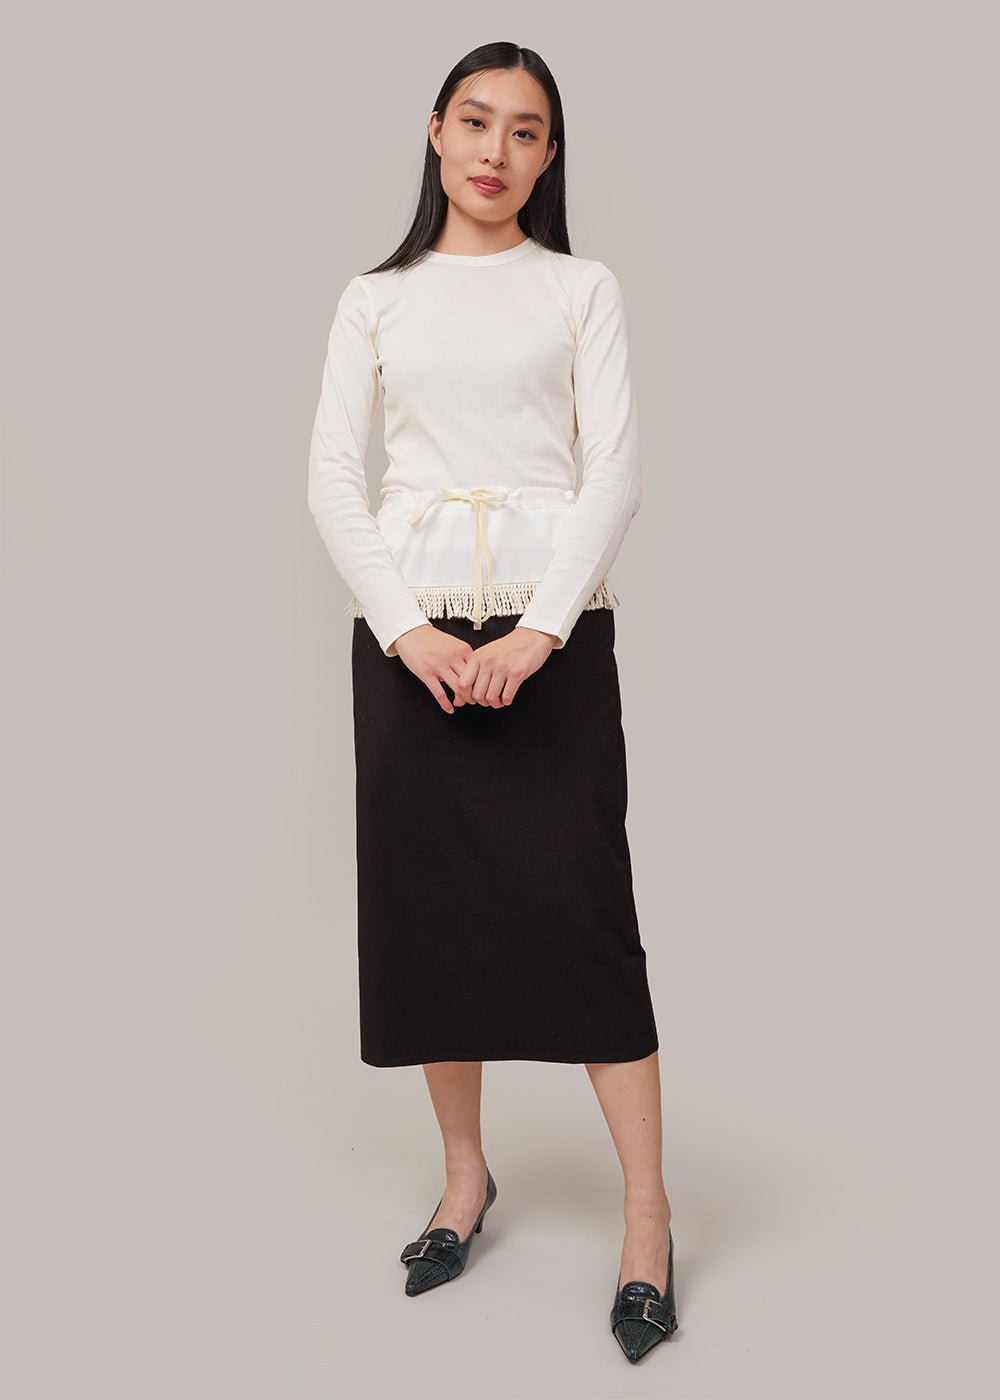 By Signe Black/White Frill Skirt - New Classics Studios Sustainable Ethical Fashion Canada